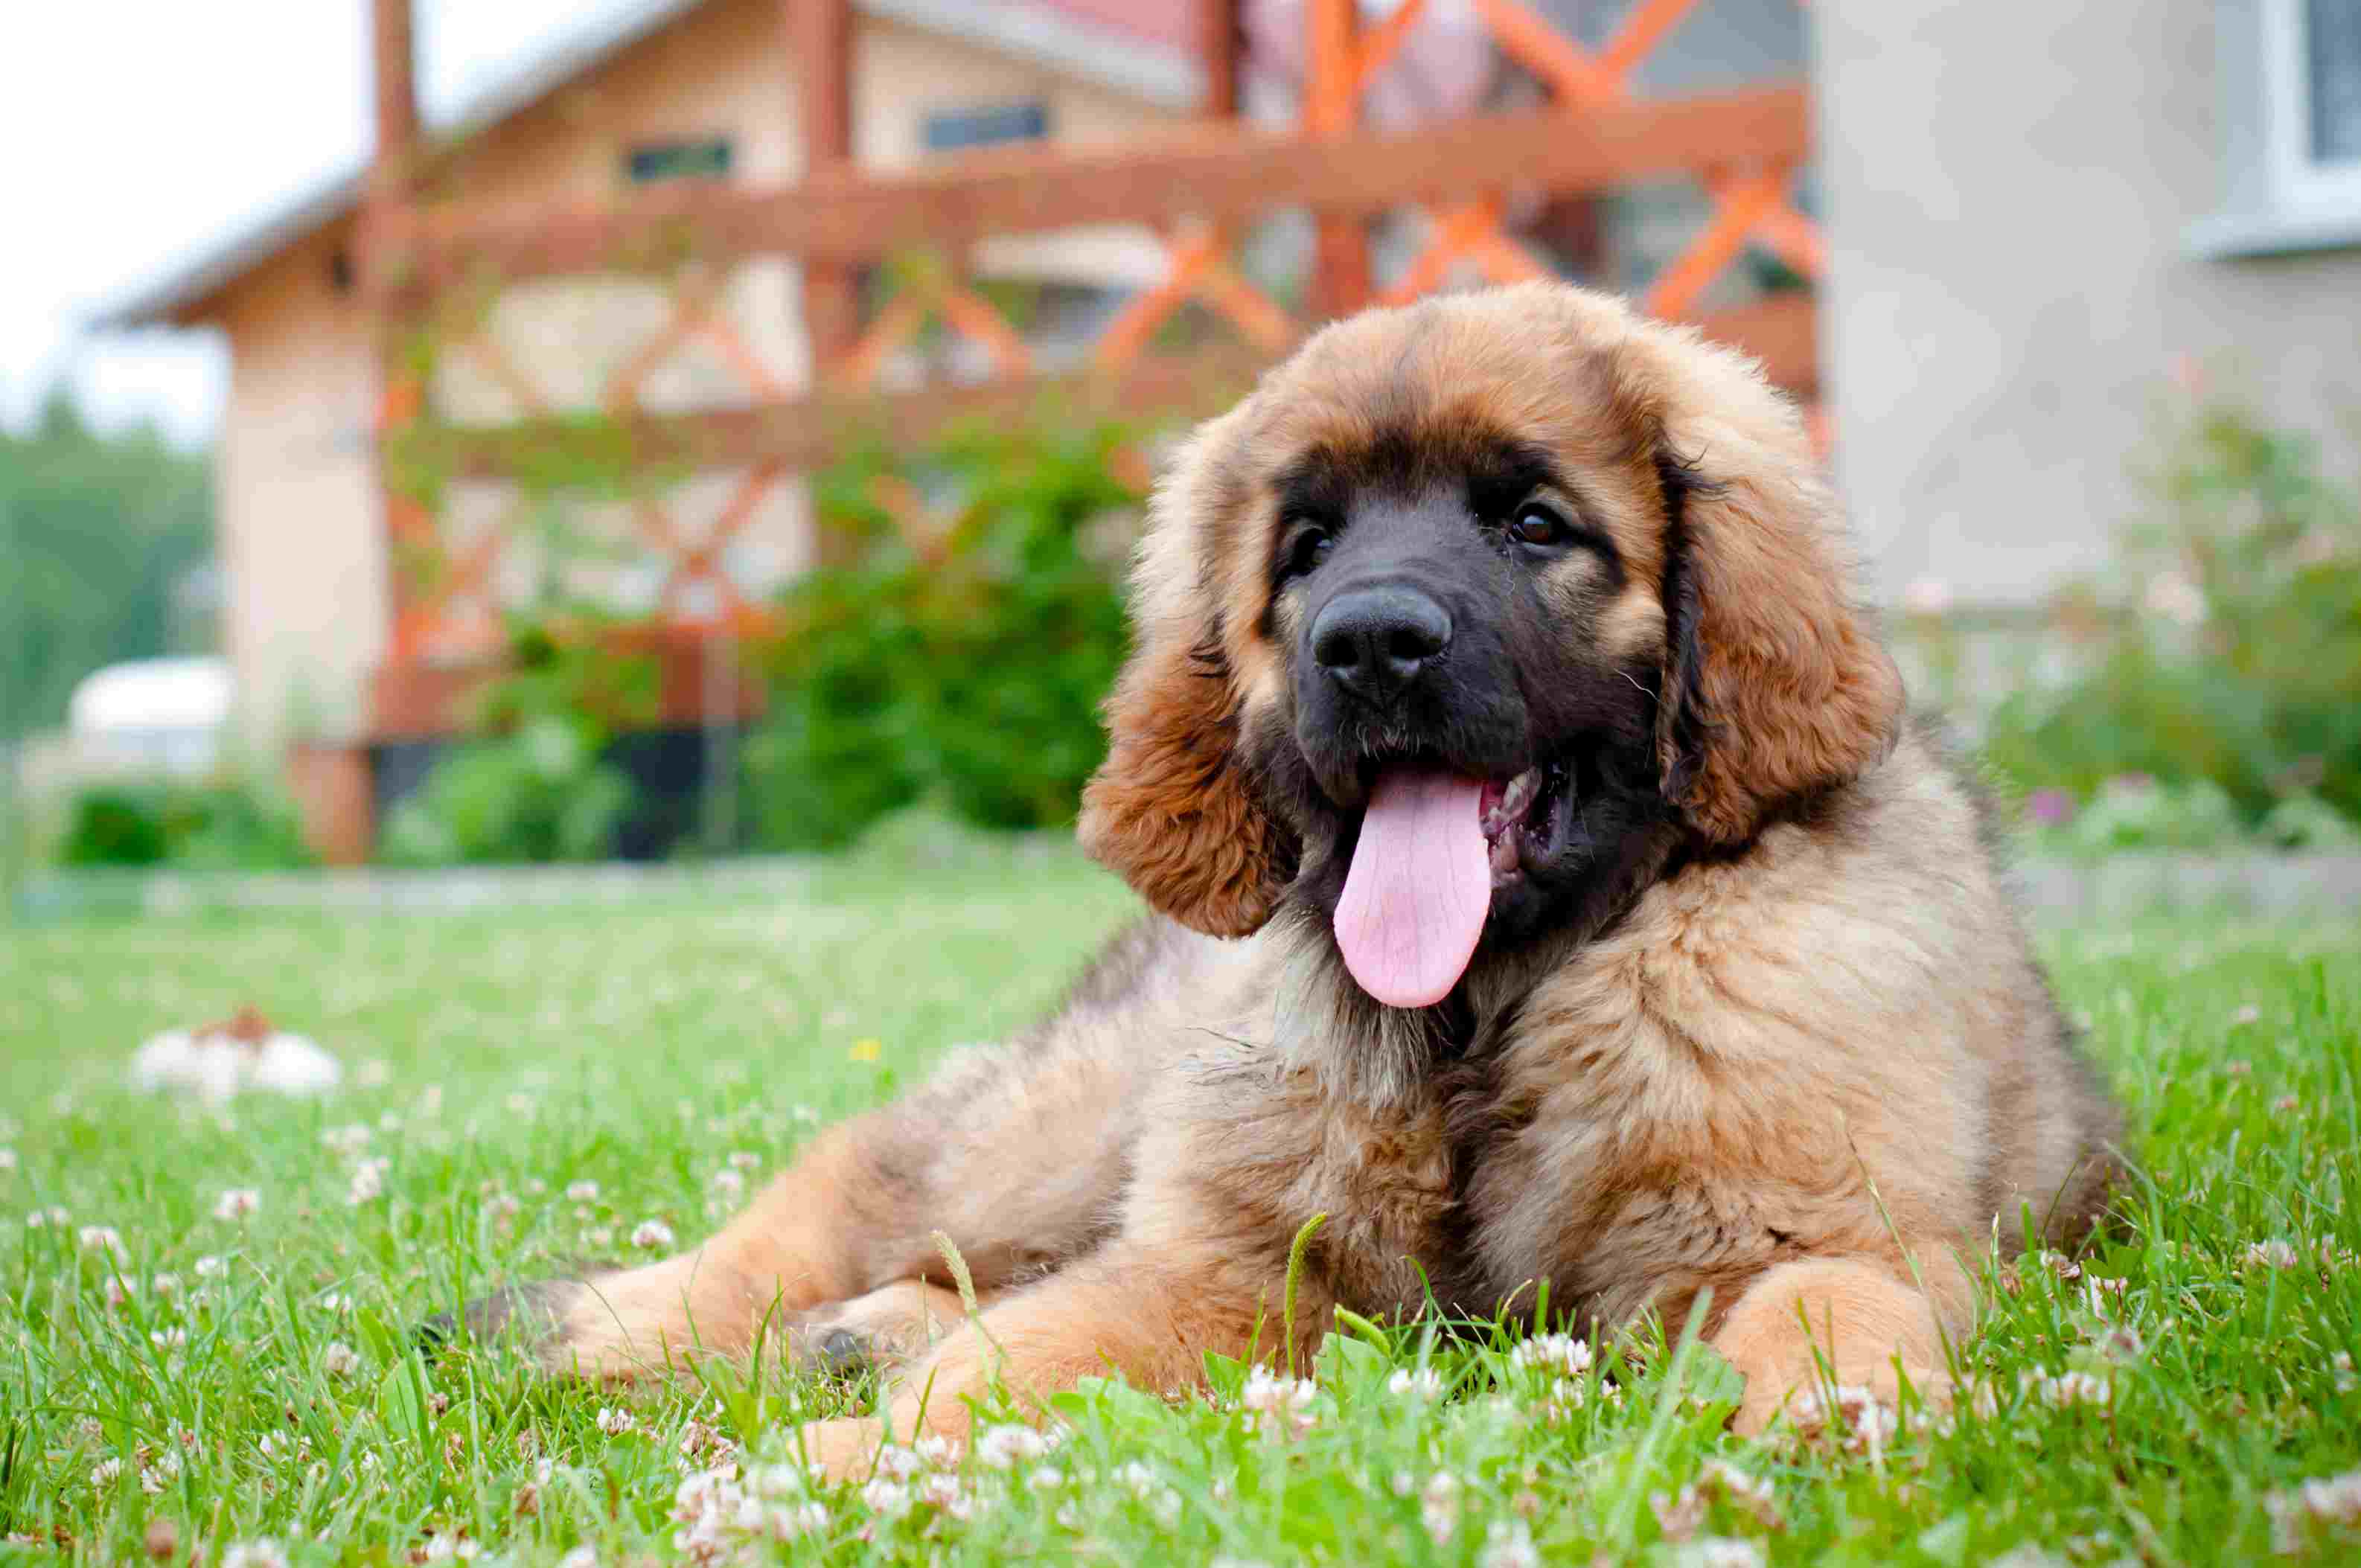 leonberger dog puppy resting in the yard